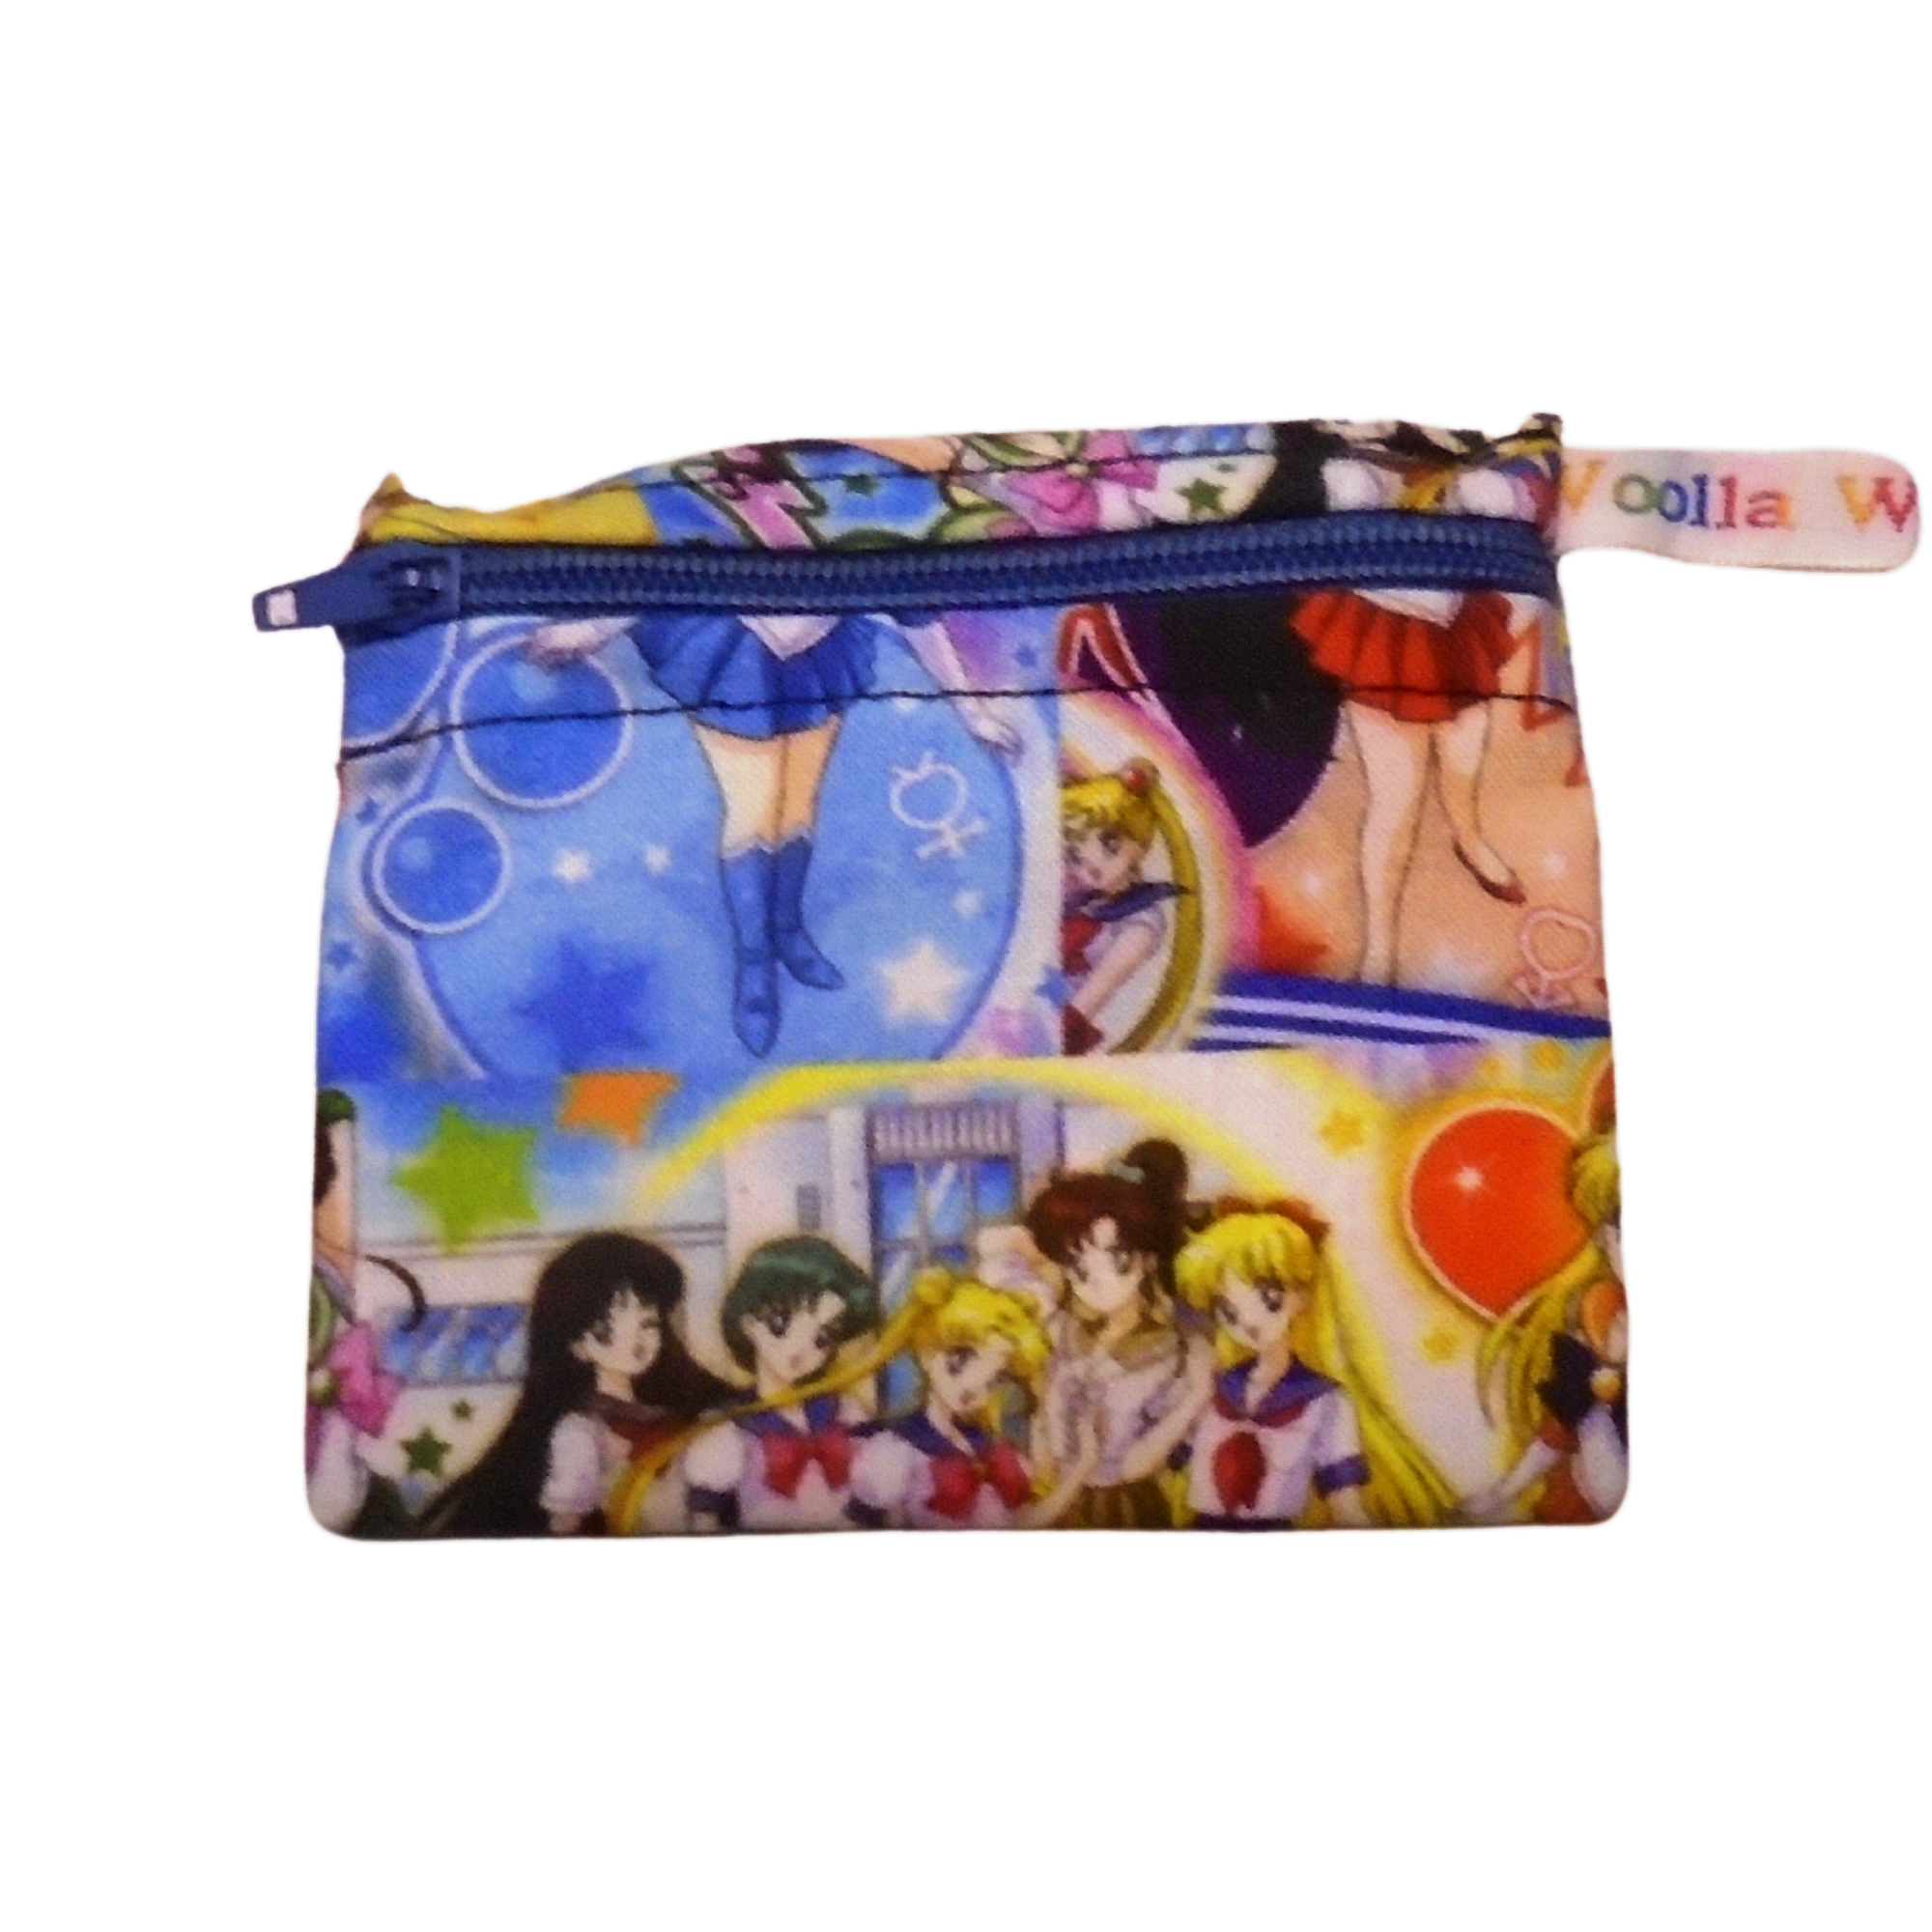 Anime Cartoon - Pippins Pouch - Handmade Cotton Zipped Pouch for Snacks and Food Storage